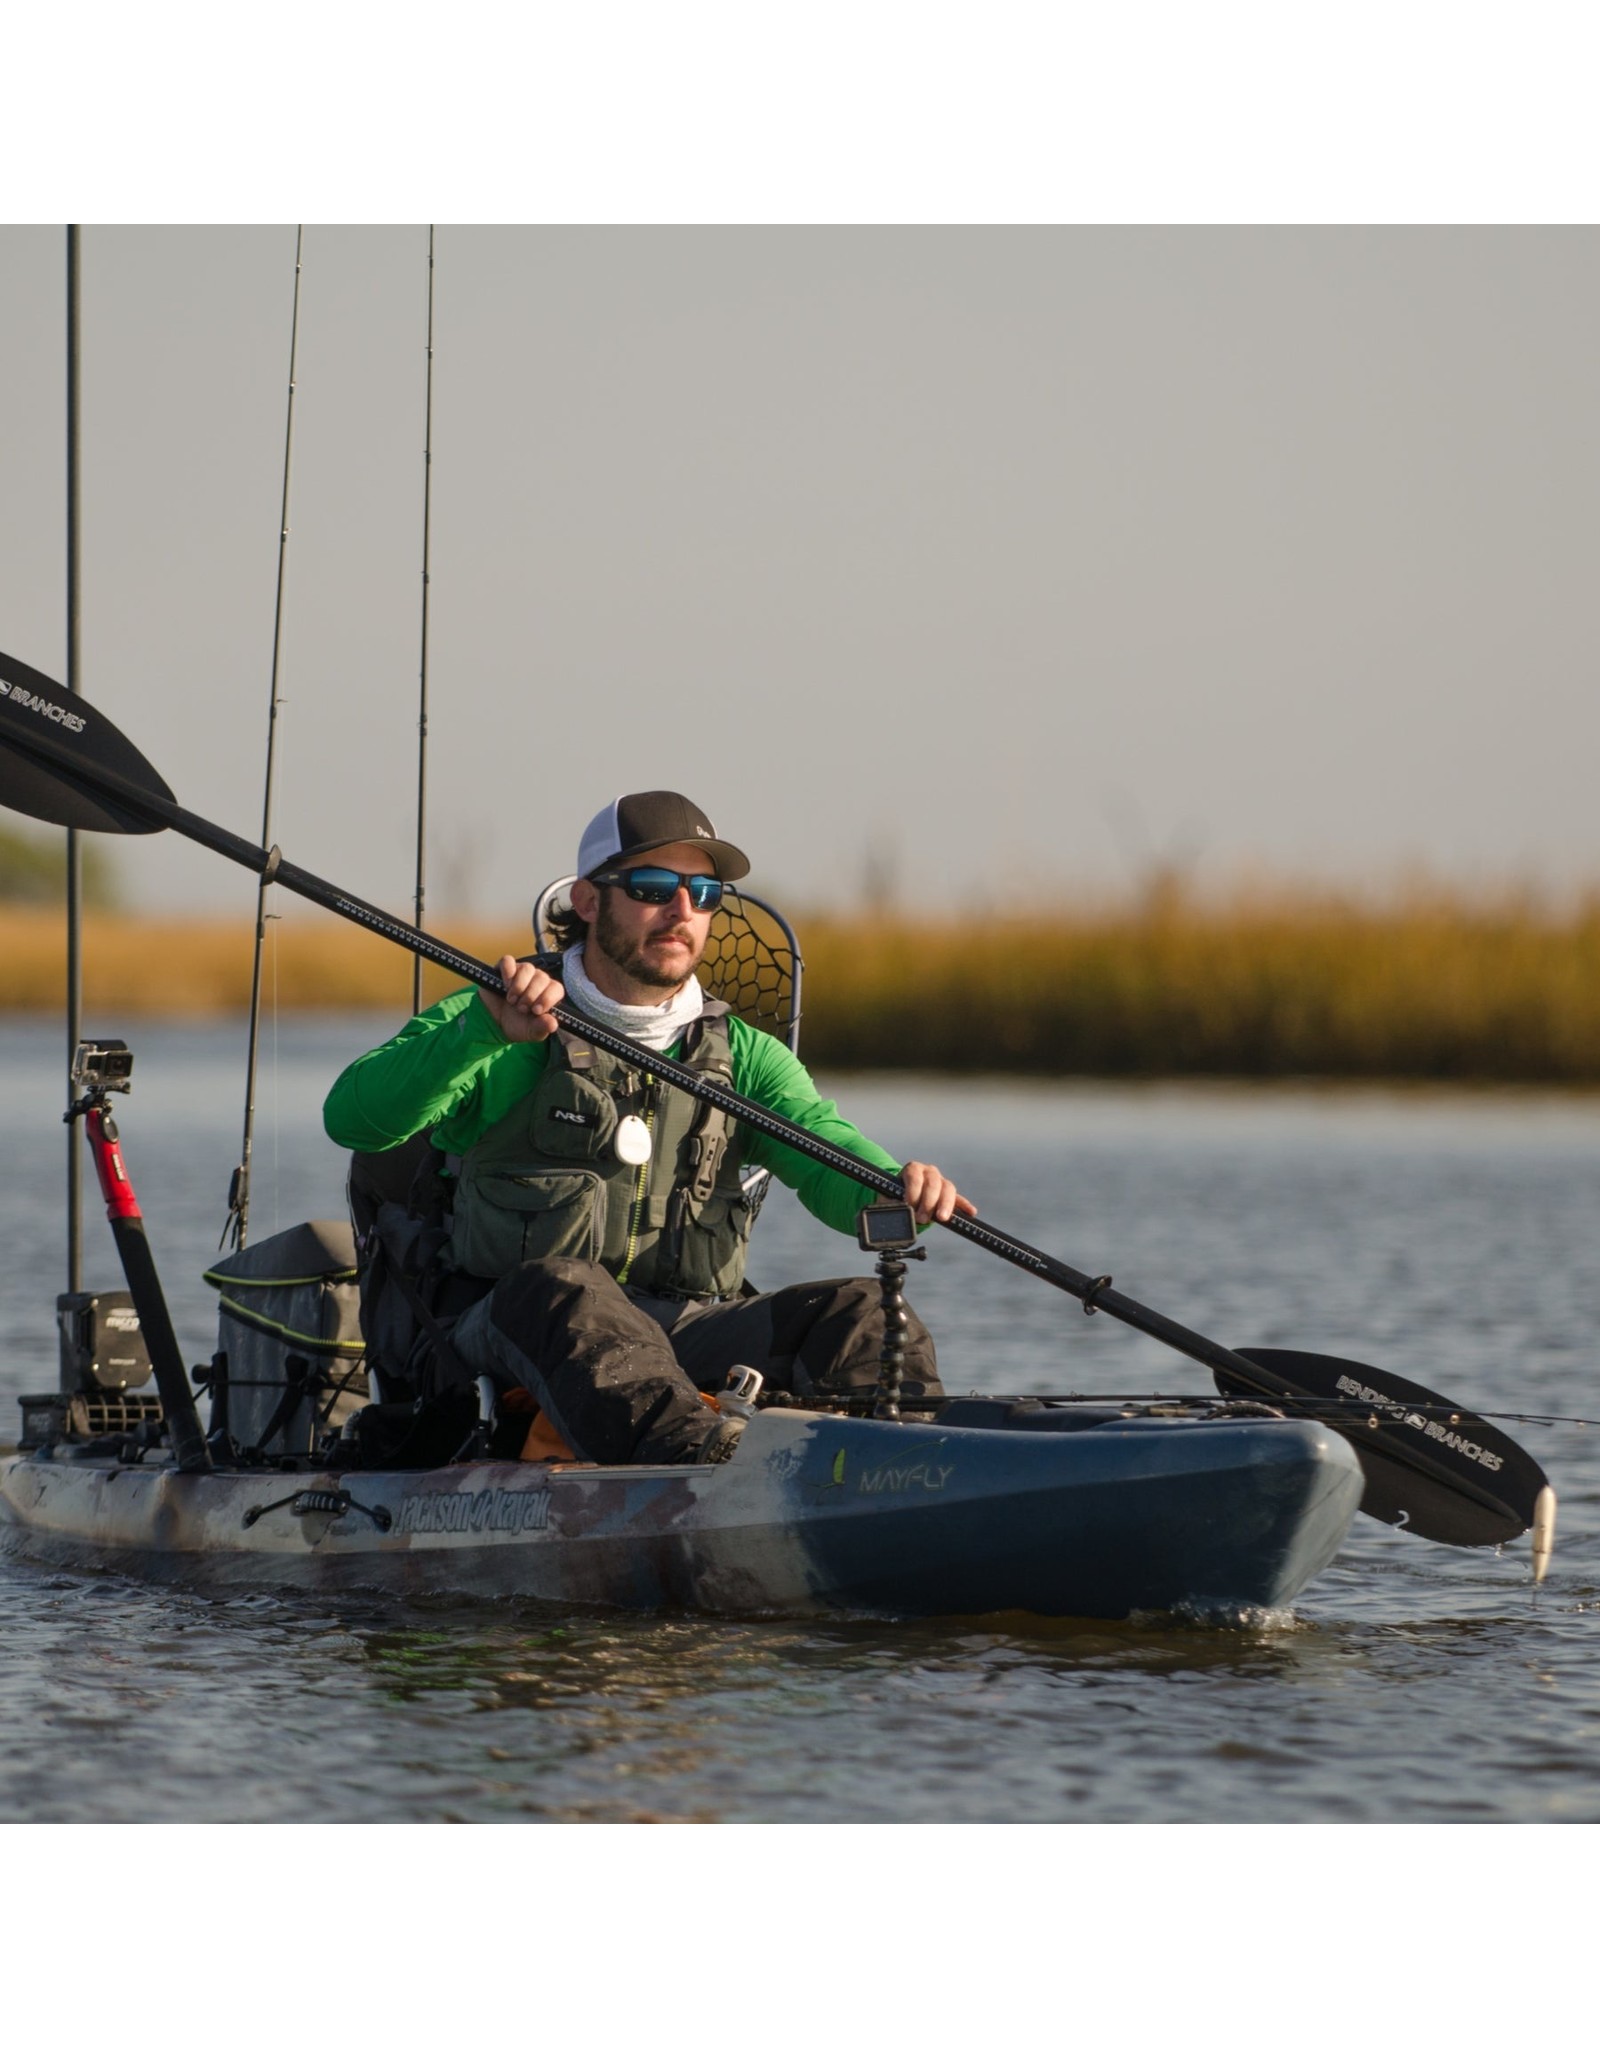 Bending Branches The best overall value in kayak fishing paddles, the Ace combines the weight savings of a carbon shaft with the most durable blades available.  Oversized carbon-reinforced nylon blades provide more power and efficiency for loaded down fishing kayaks 100%